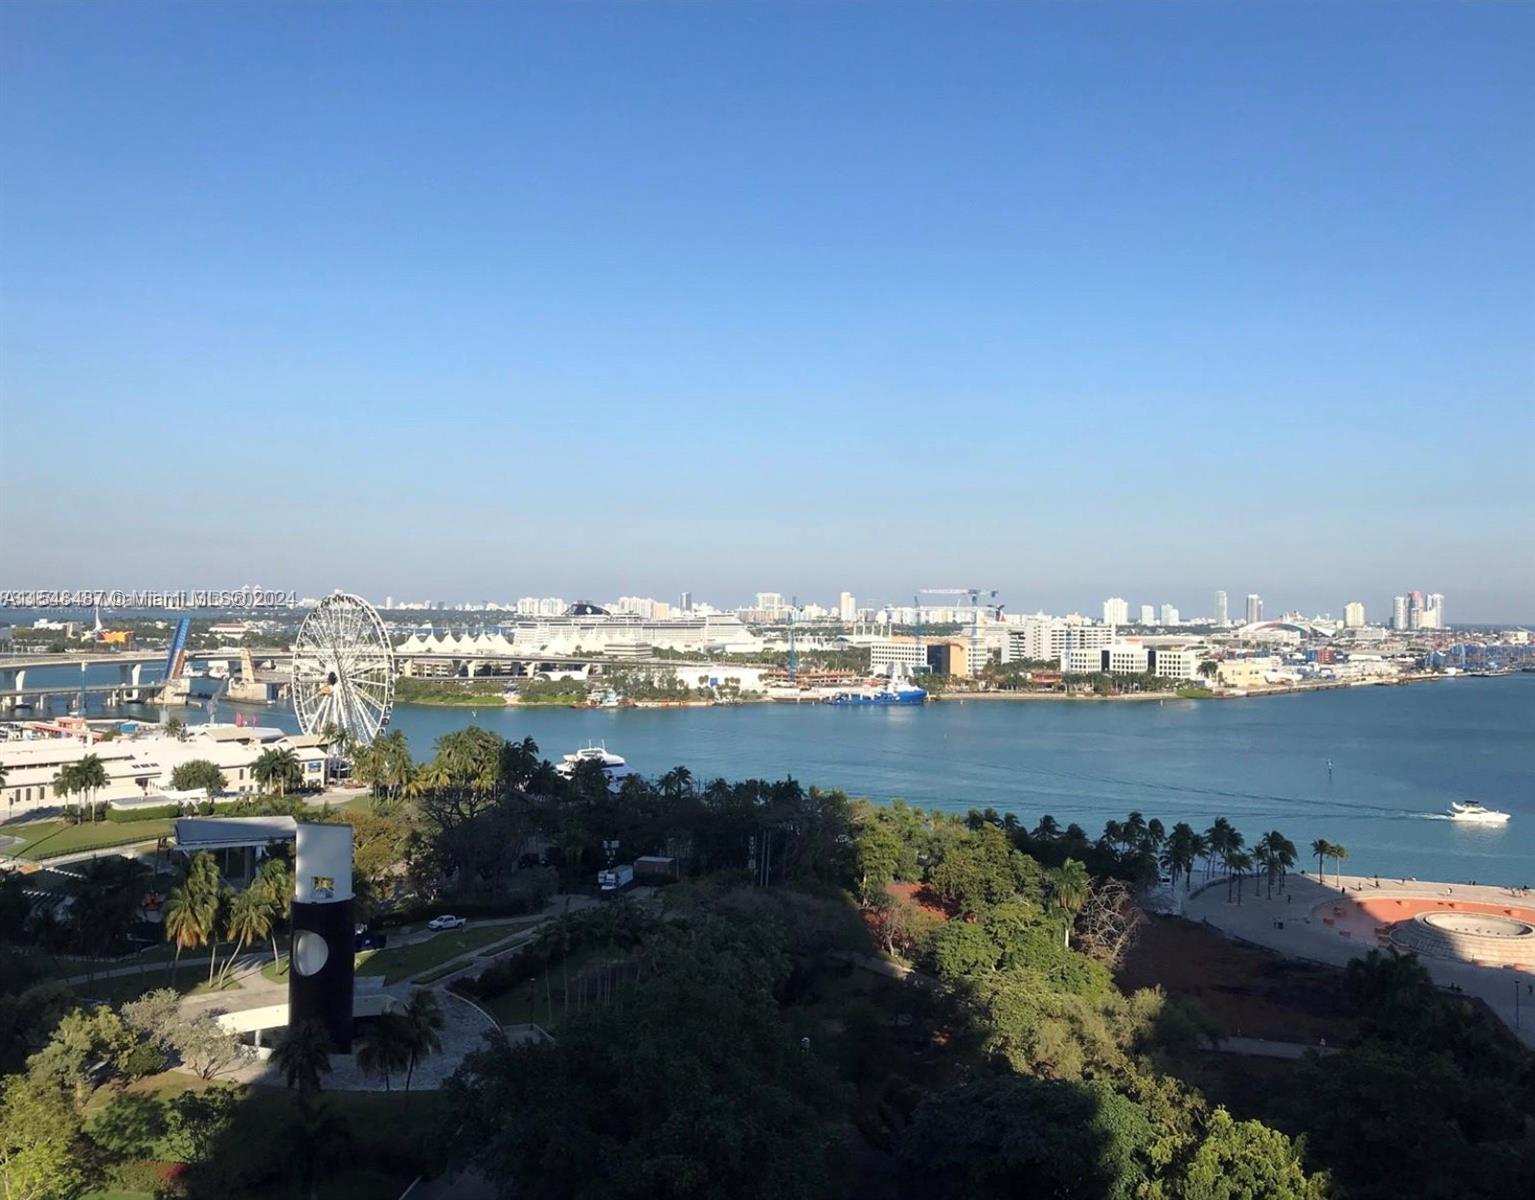 Unfurnished or partially furnished, 2BR+Den( Converted to a 3rd BD), 2 full Bath 1,322 SF apartment at 50 Biscayne w/direct EAST view & floor-to-ceiling windows from every room. Unit features spacious a split floor-plan, large bedrooms both w/ensuite & walk-in closets; open concept kitchen, living/dining rooms. Amenities include: 24-hour concierge, security & valet parking, infinity-edge pool & poolside cabanas, hot tub, formal & informal clubrooms with kitchen, billiards table, wet bar & media center, state-of-the-art fitness center, yoga/pilates room, sauna & steam rooms. Walking distance to Shops at Bayside, AAArena, lots of restaurants, Arsht Center, Whole Foods & Brickell. By car, 50 Biscayne is just 10 min from South Beach, 15 min. from Wynwood,  20 min. from the Miami Int'l Airport.